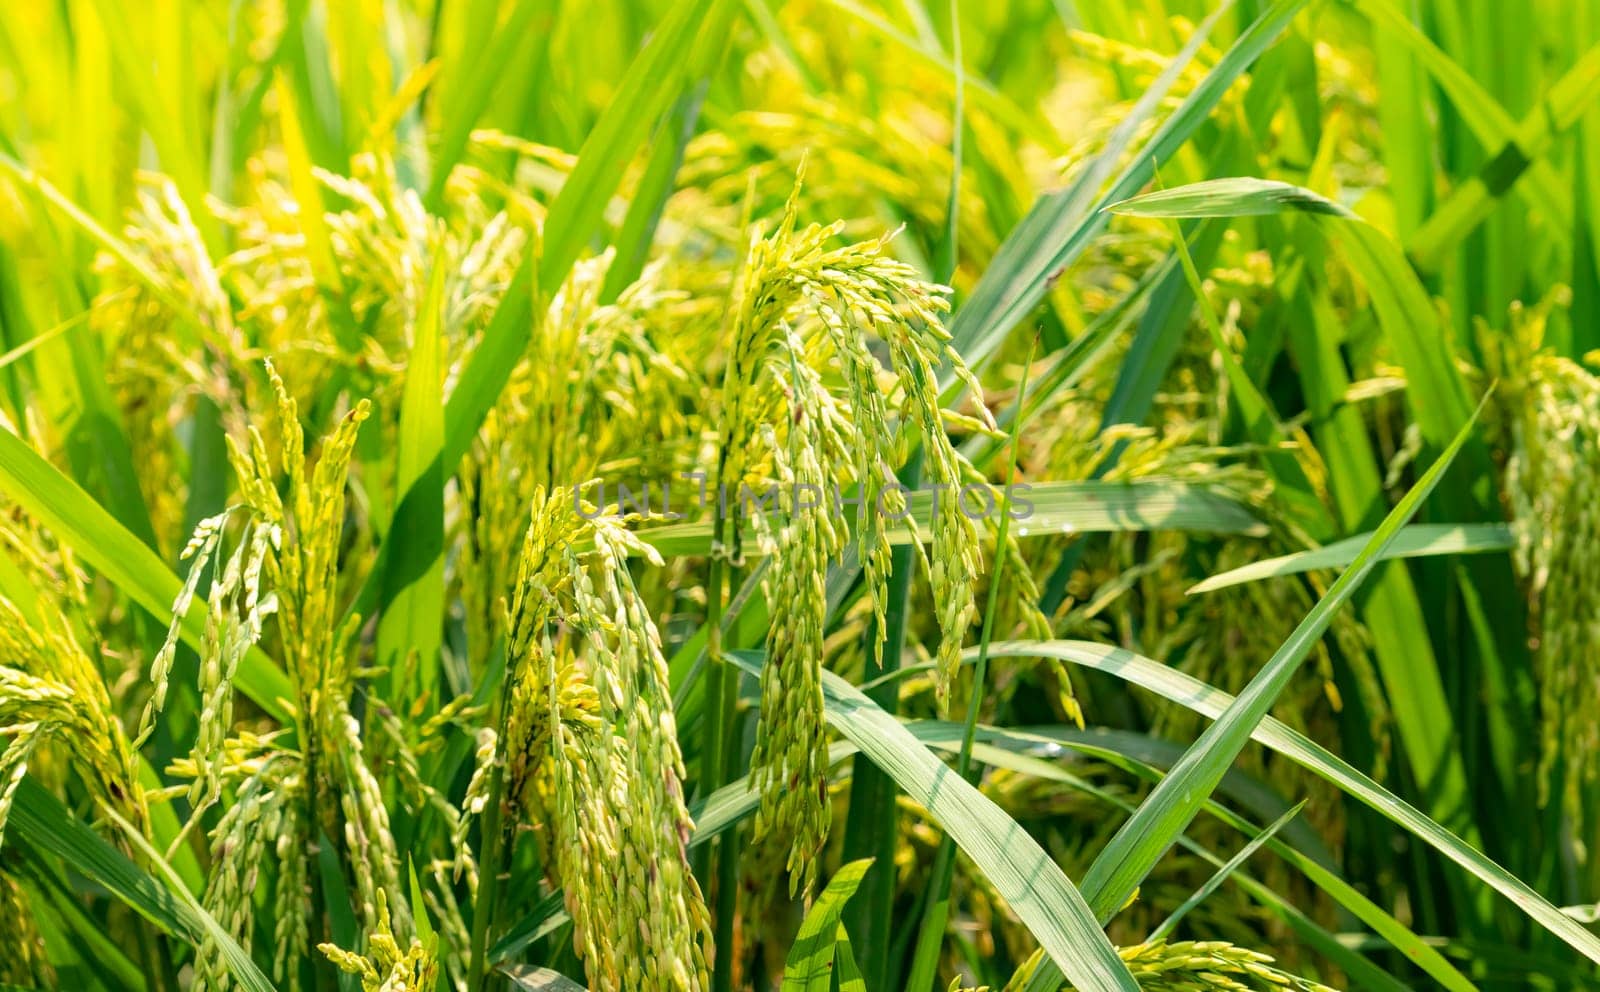 Green rice paddy field. Rice plantation. Organic jasmine rice farm in asia. Rice growing agriculture. Beautiful nature of farmland. Asian food. Paddy field wait for harvest. Plant cultivation. by Fahroni